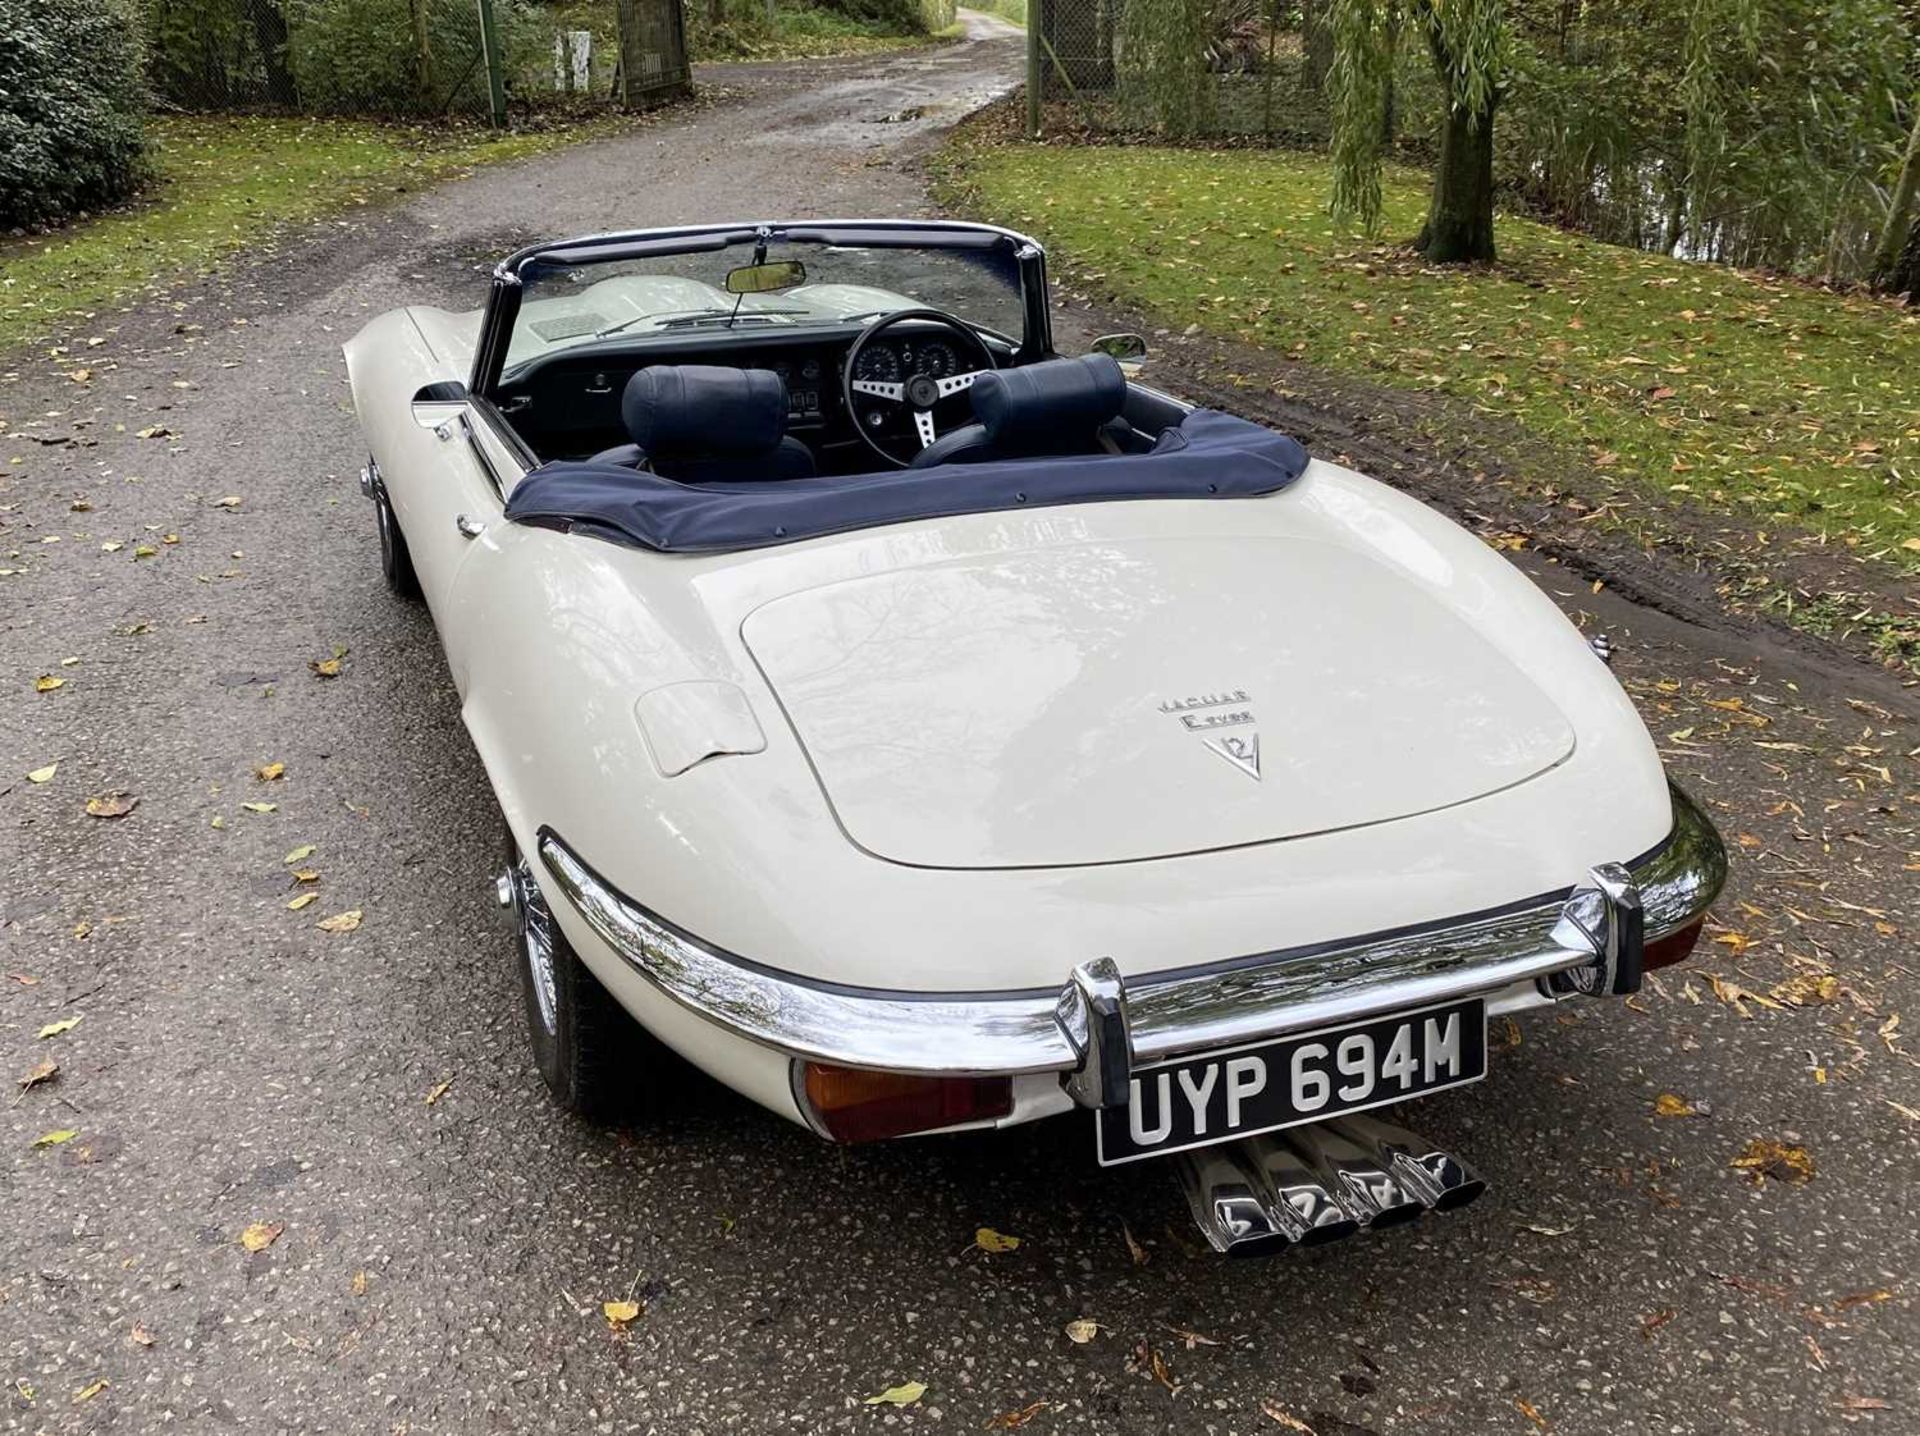 1973 Jaguar E-Type V12 Roadster As seen in Only Fools and Horses - Image 39 of 105